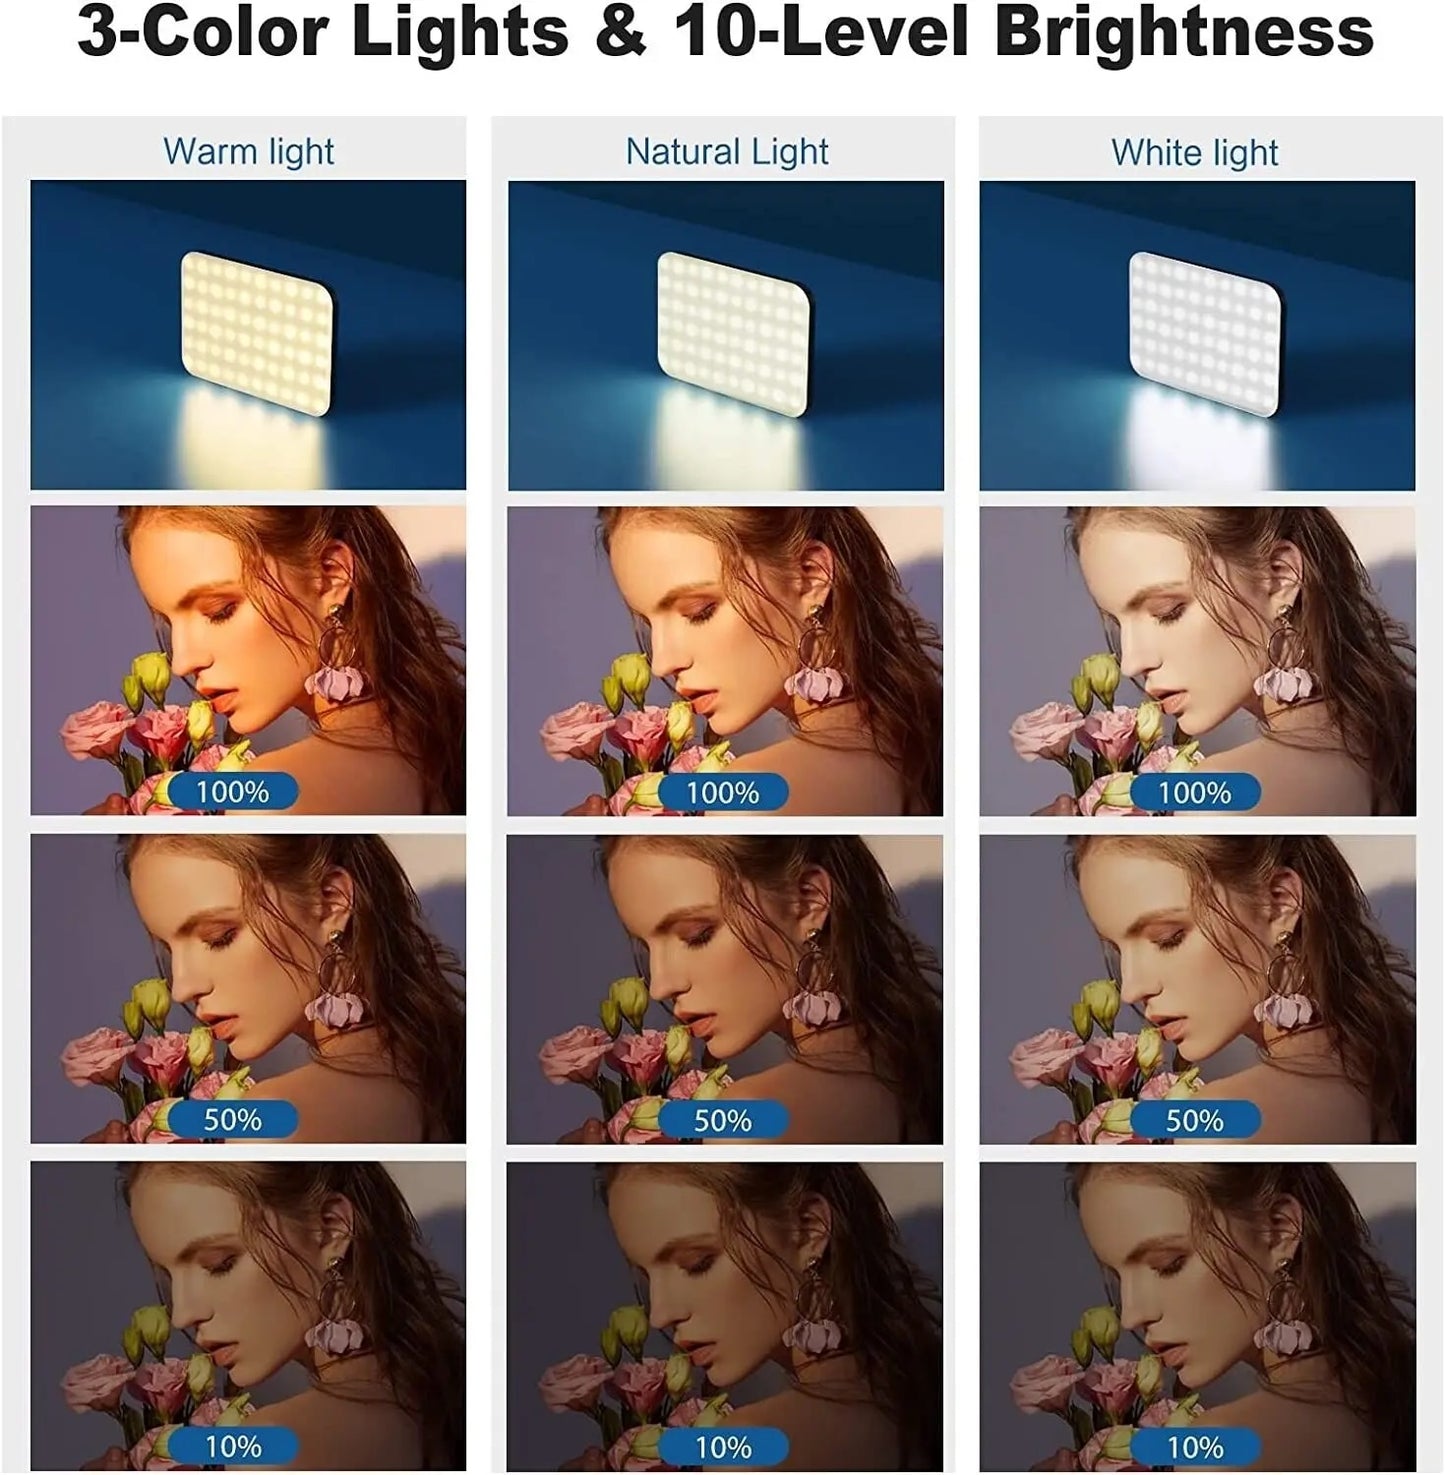 120 LED High Power Rechargeable Clip Fill Video Light with Front & Back Clip Adjusted 3 Light Modes for Phone iPad